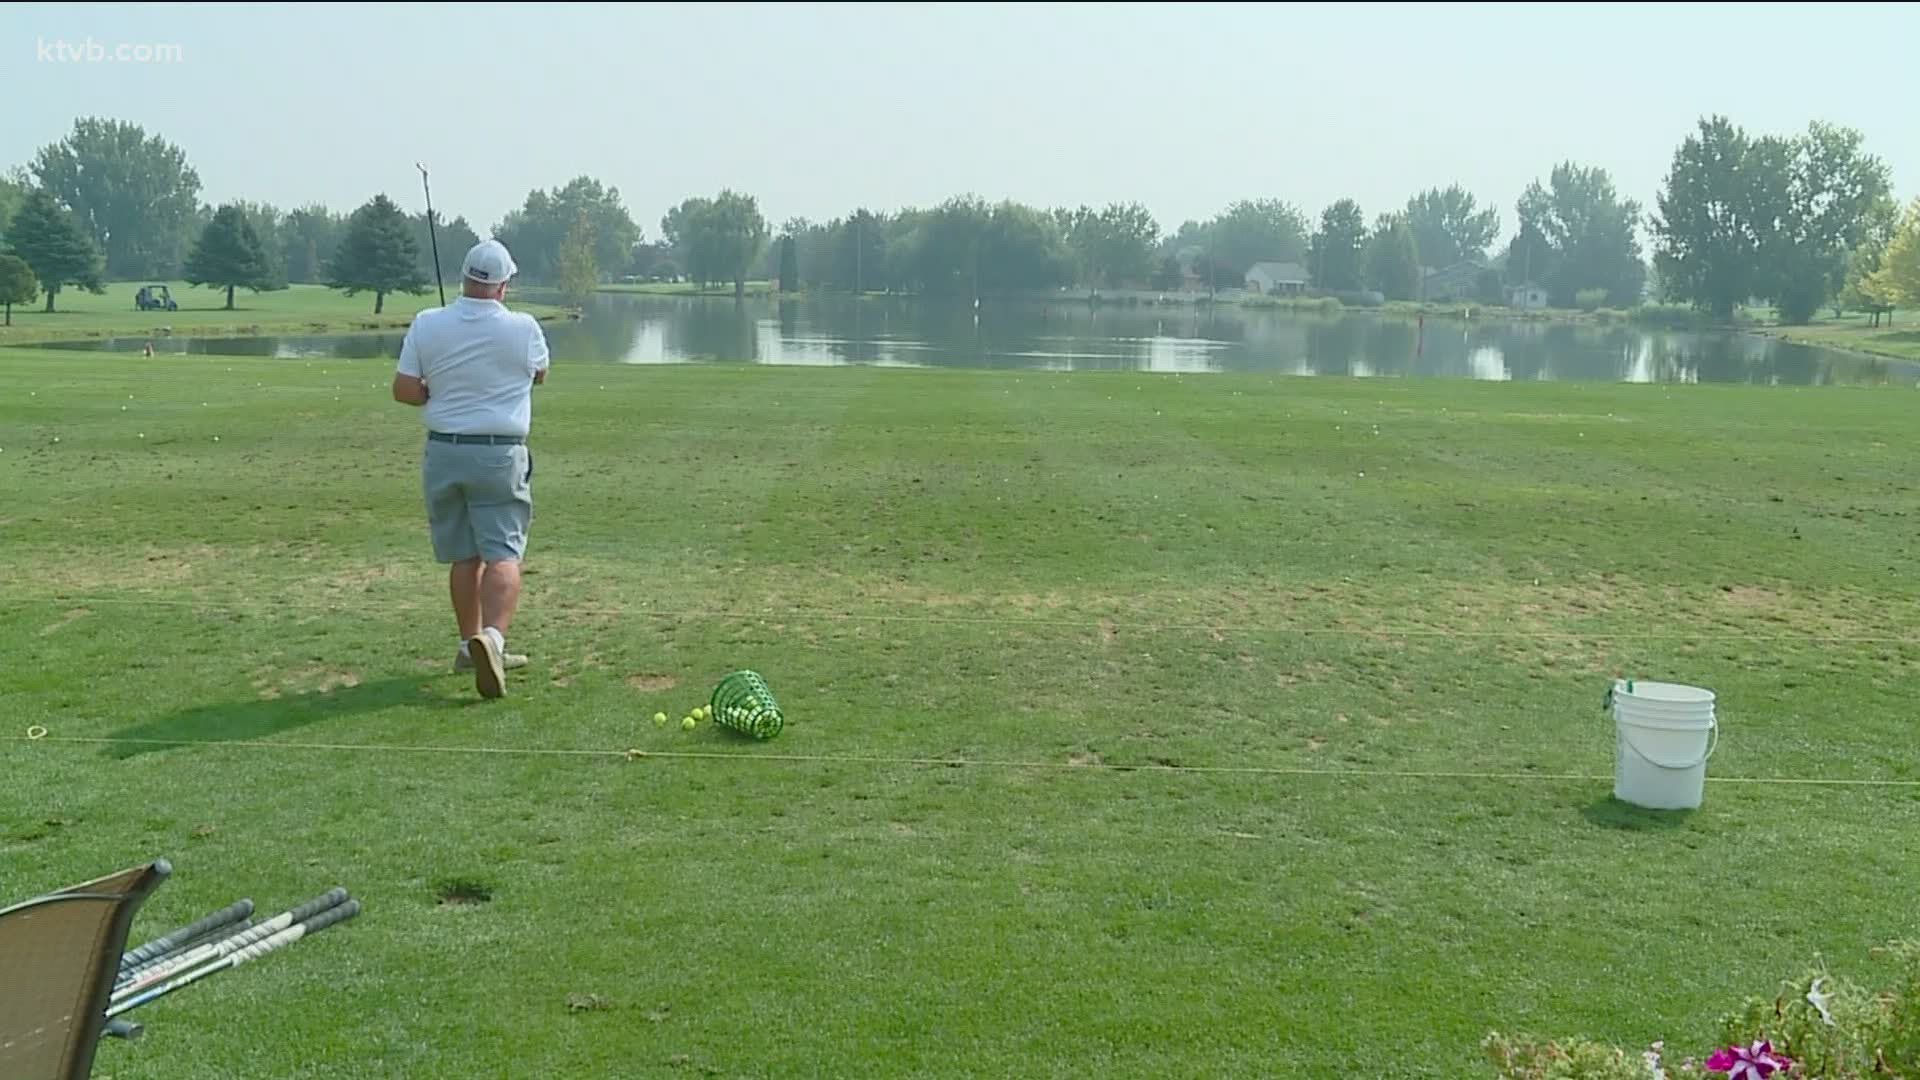 The Parks and Recreation Department says it is looking to create a master plan for the golf course.